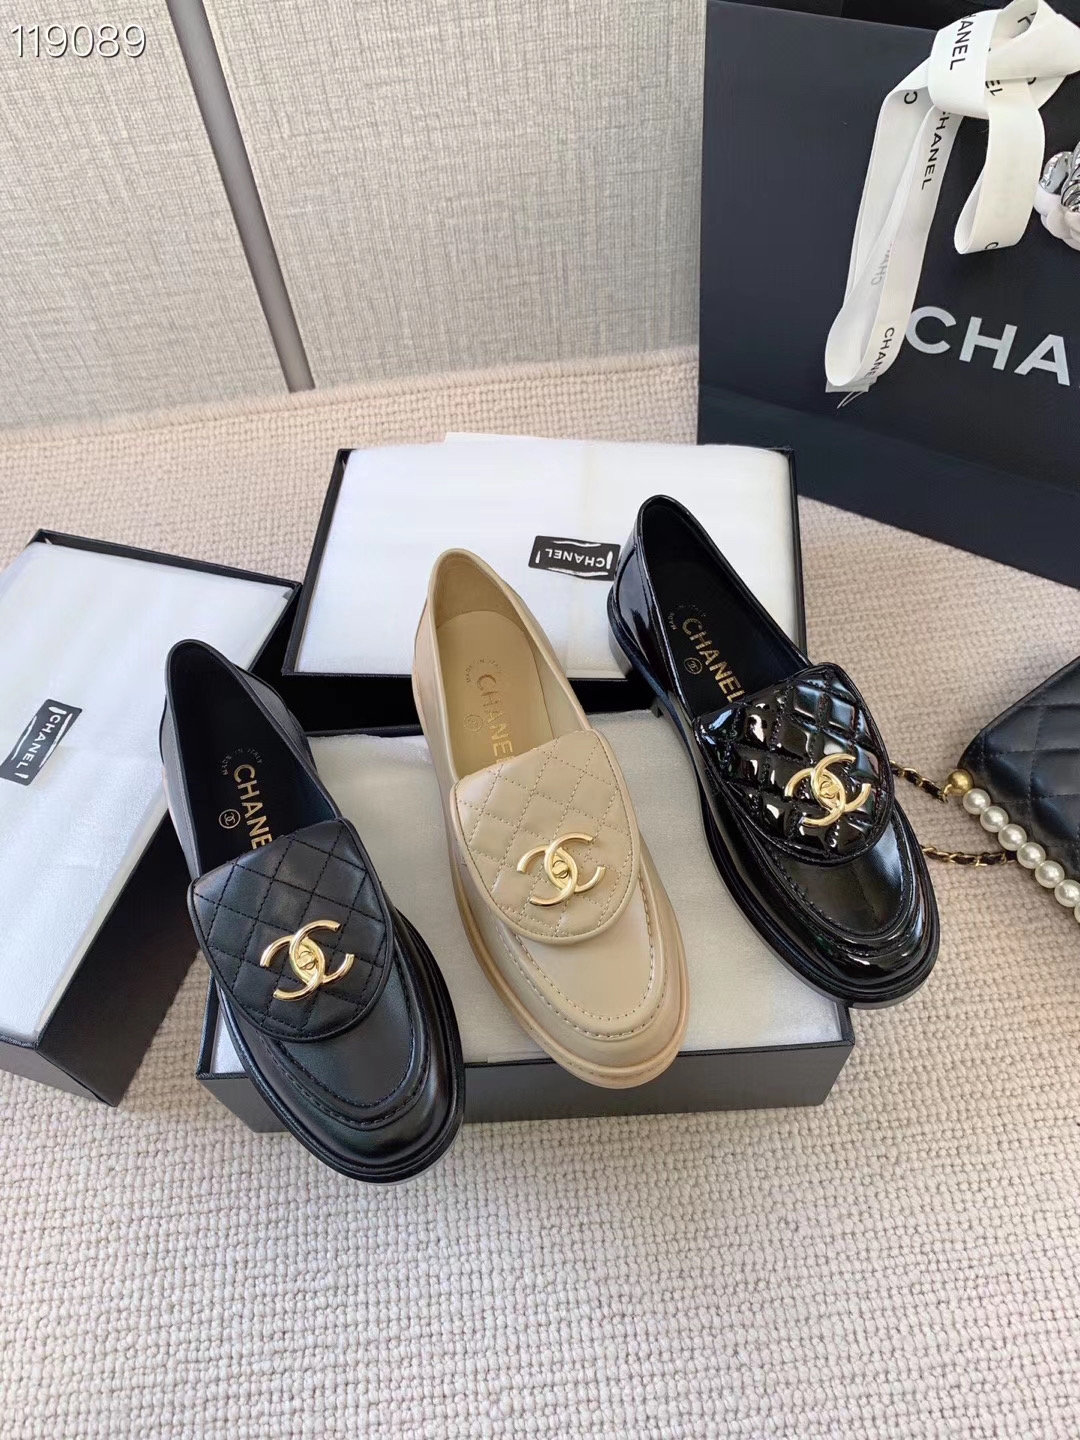 Chanel Shoes 